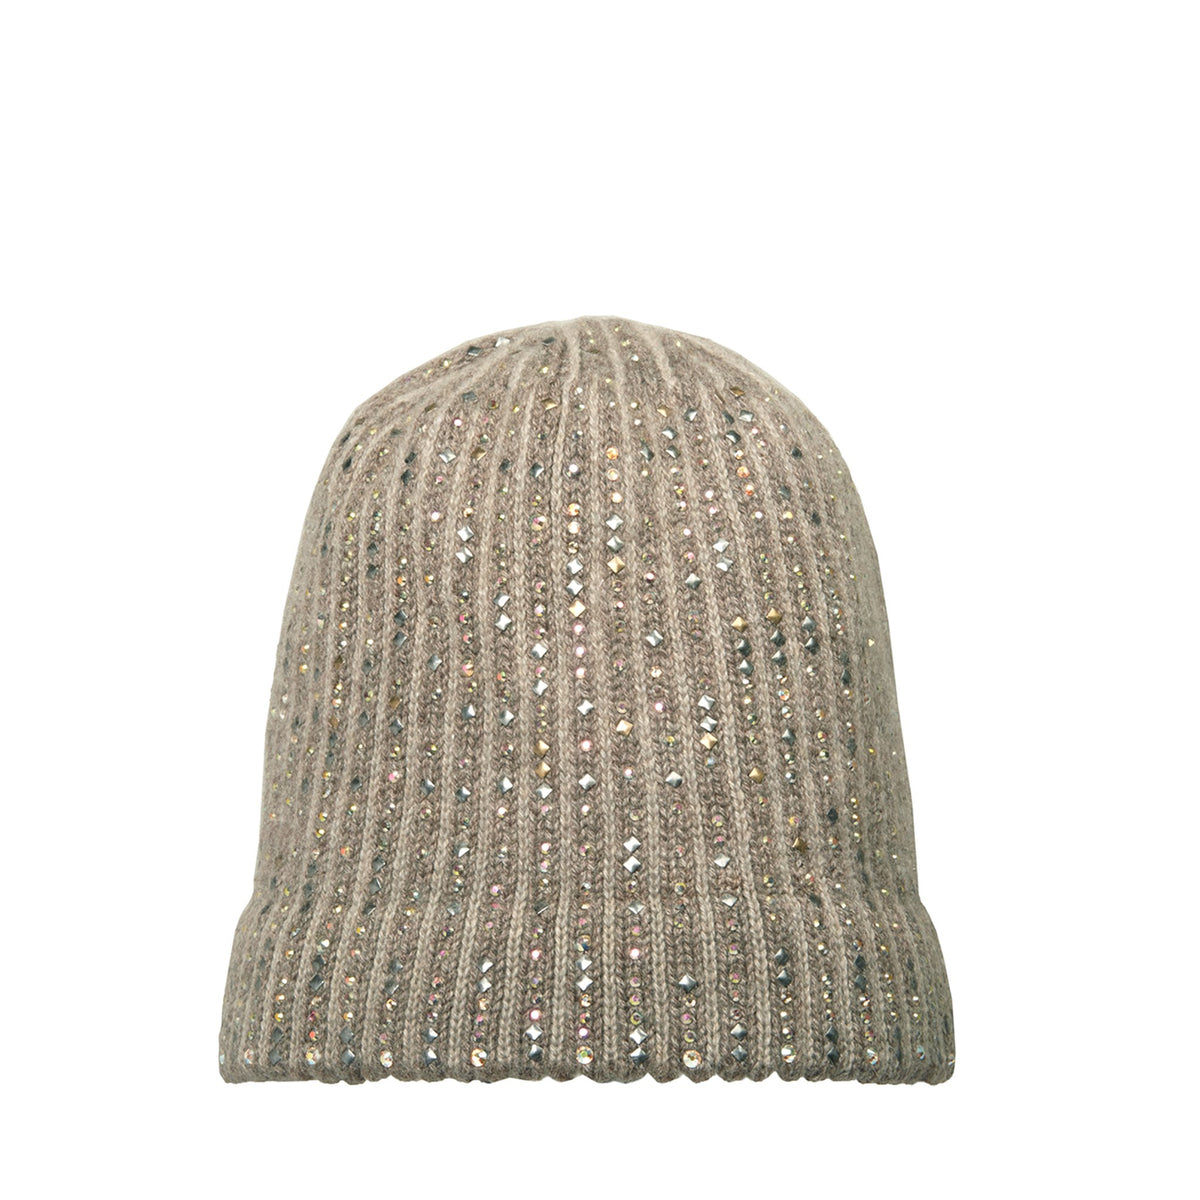 5-ply cashmere Lattice Deluxe Hat heavily embellished with alternating stripes of crystals and tiny diamond metal nailheads by Elyse Allen Textiles.